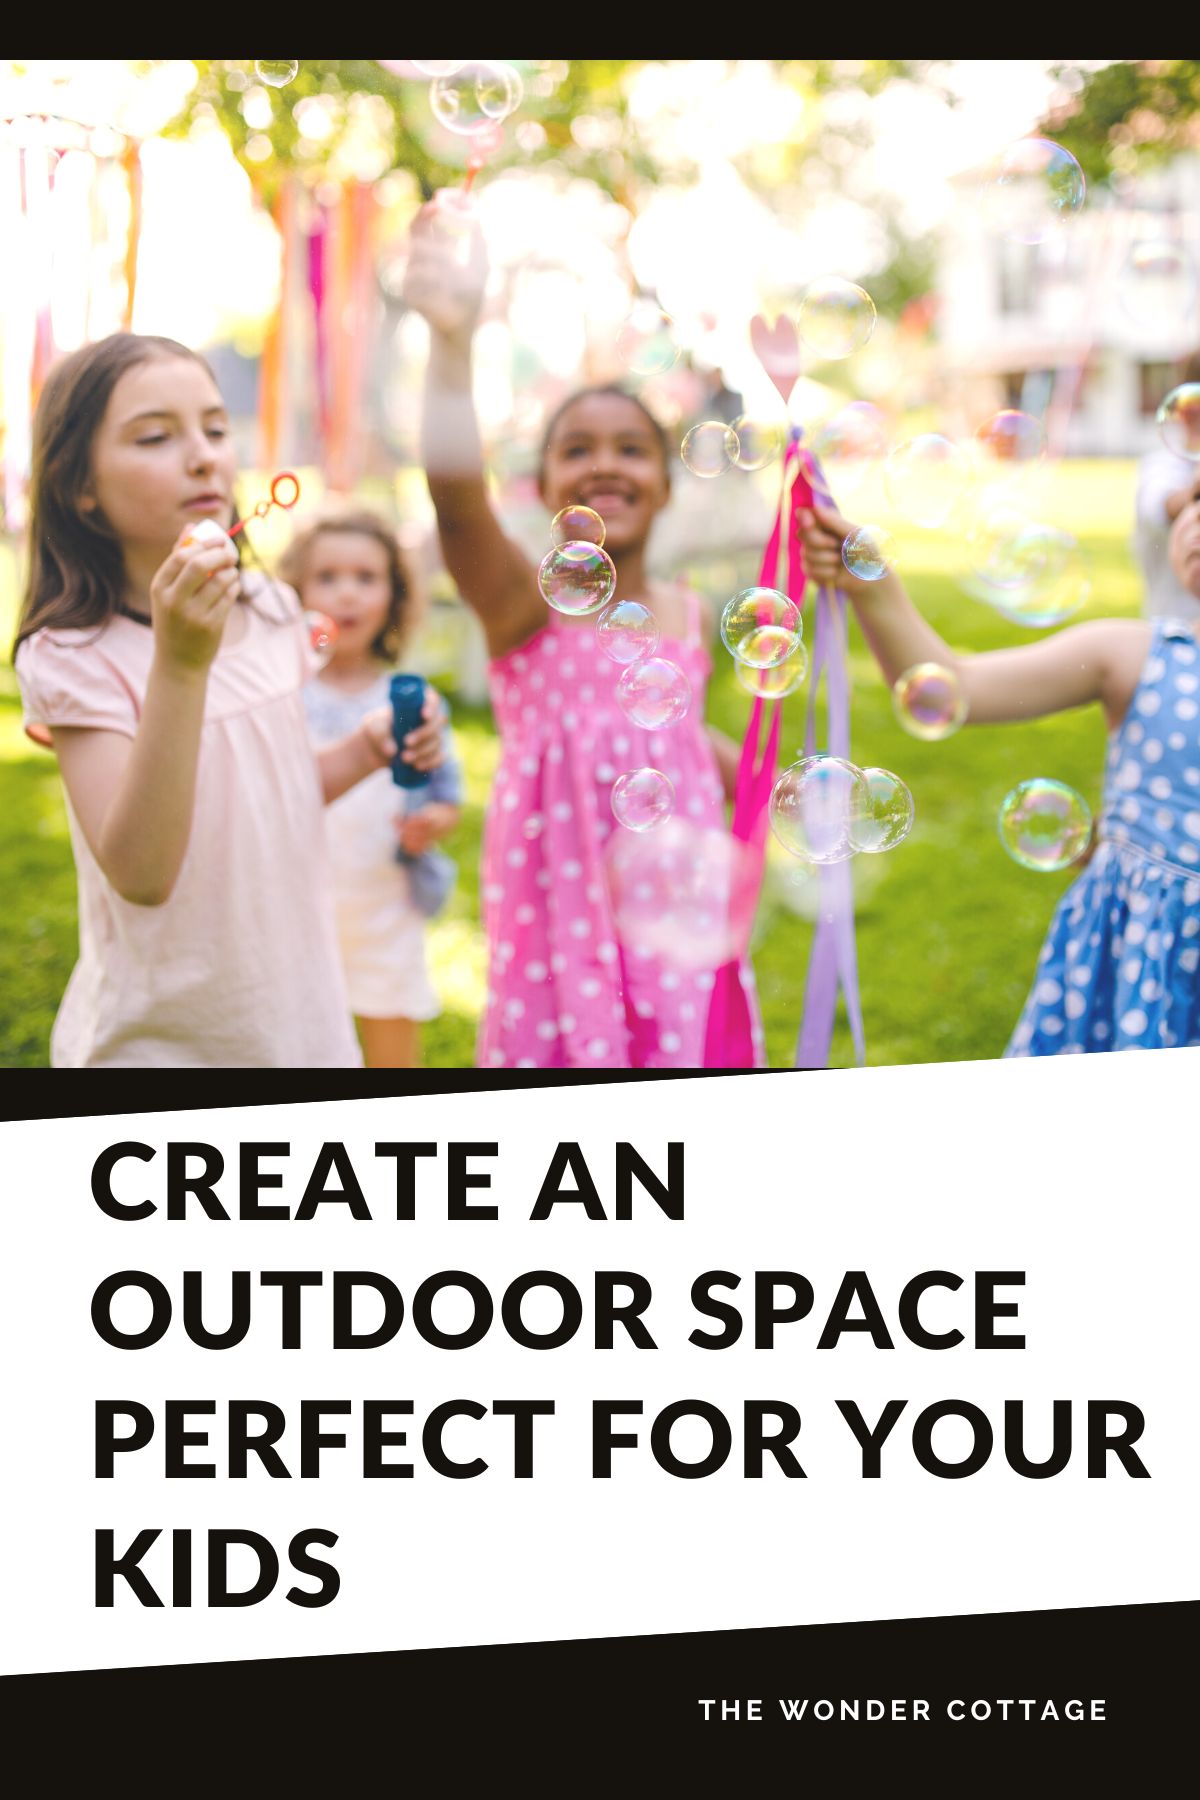 Some Ways To Create An Outdoor Space Perfect For Your Kids